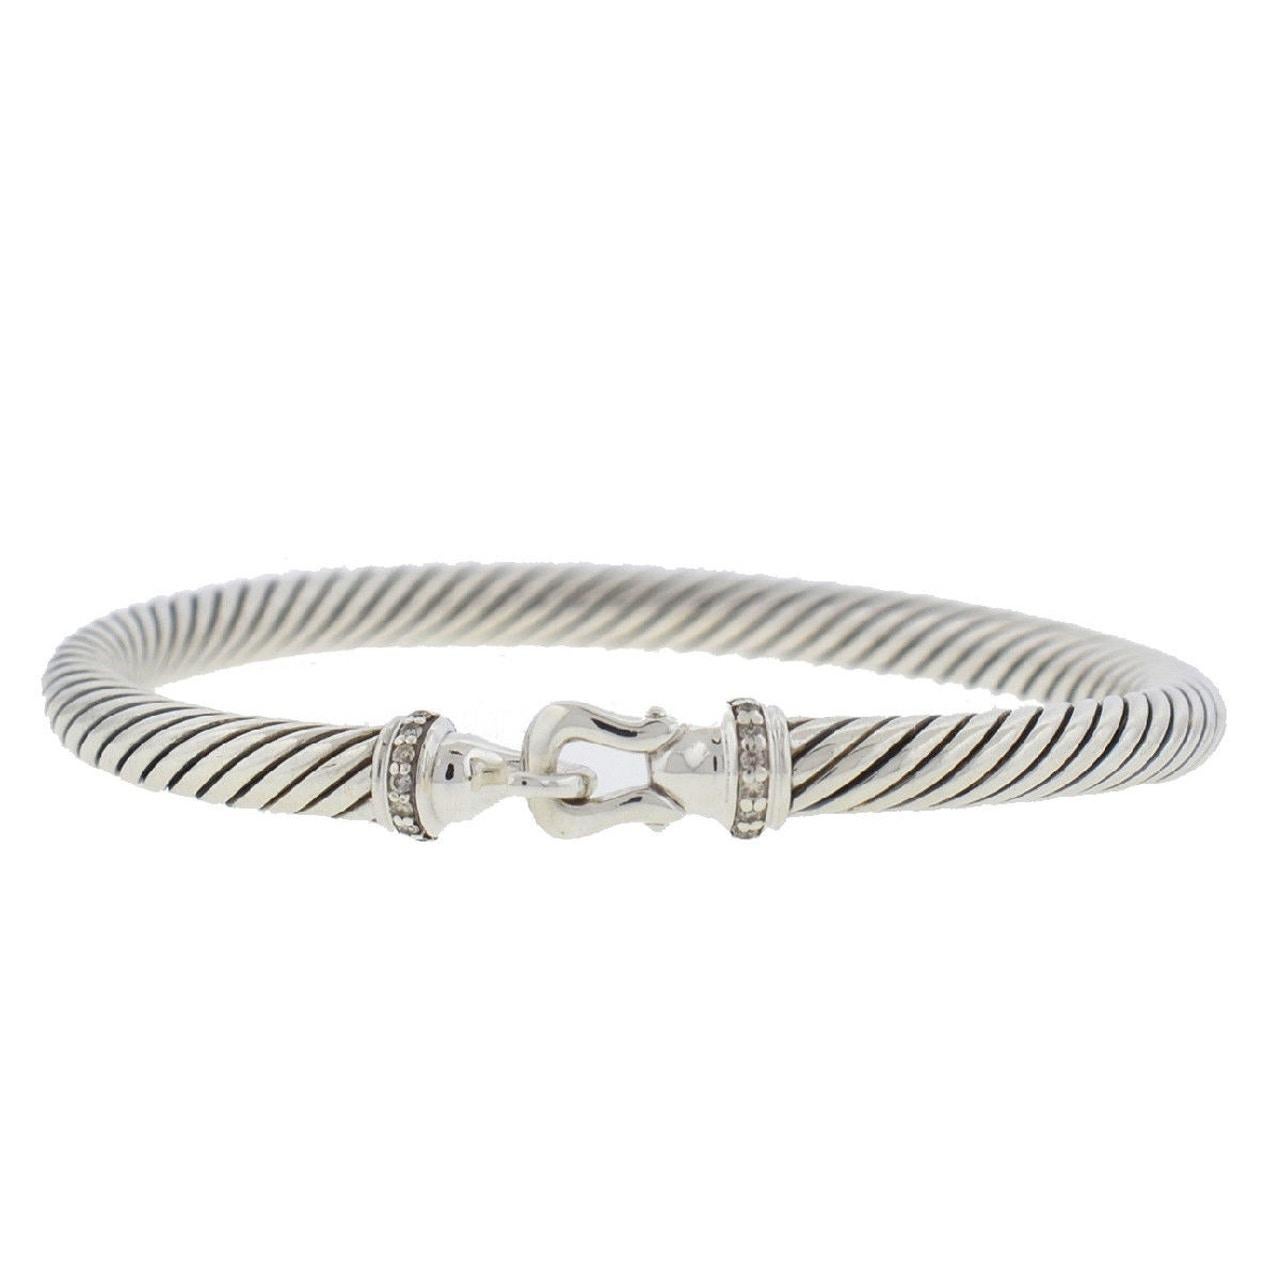 Touch of style, value, and greatness, this David Yurman Cable Buckle Bracelet is made with Sterling silver and it features pave diamonds 0.06 total carat weight cable with a hook clasp. It weighs 30.2 grams and it is 5mm wide to give you a